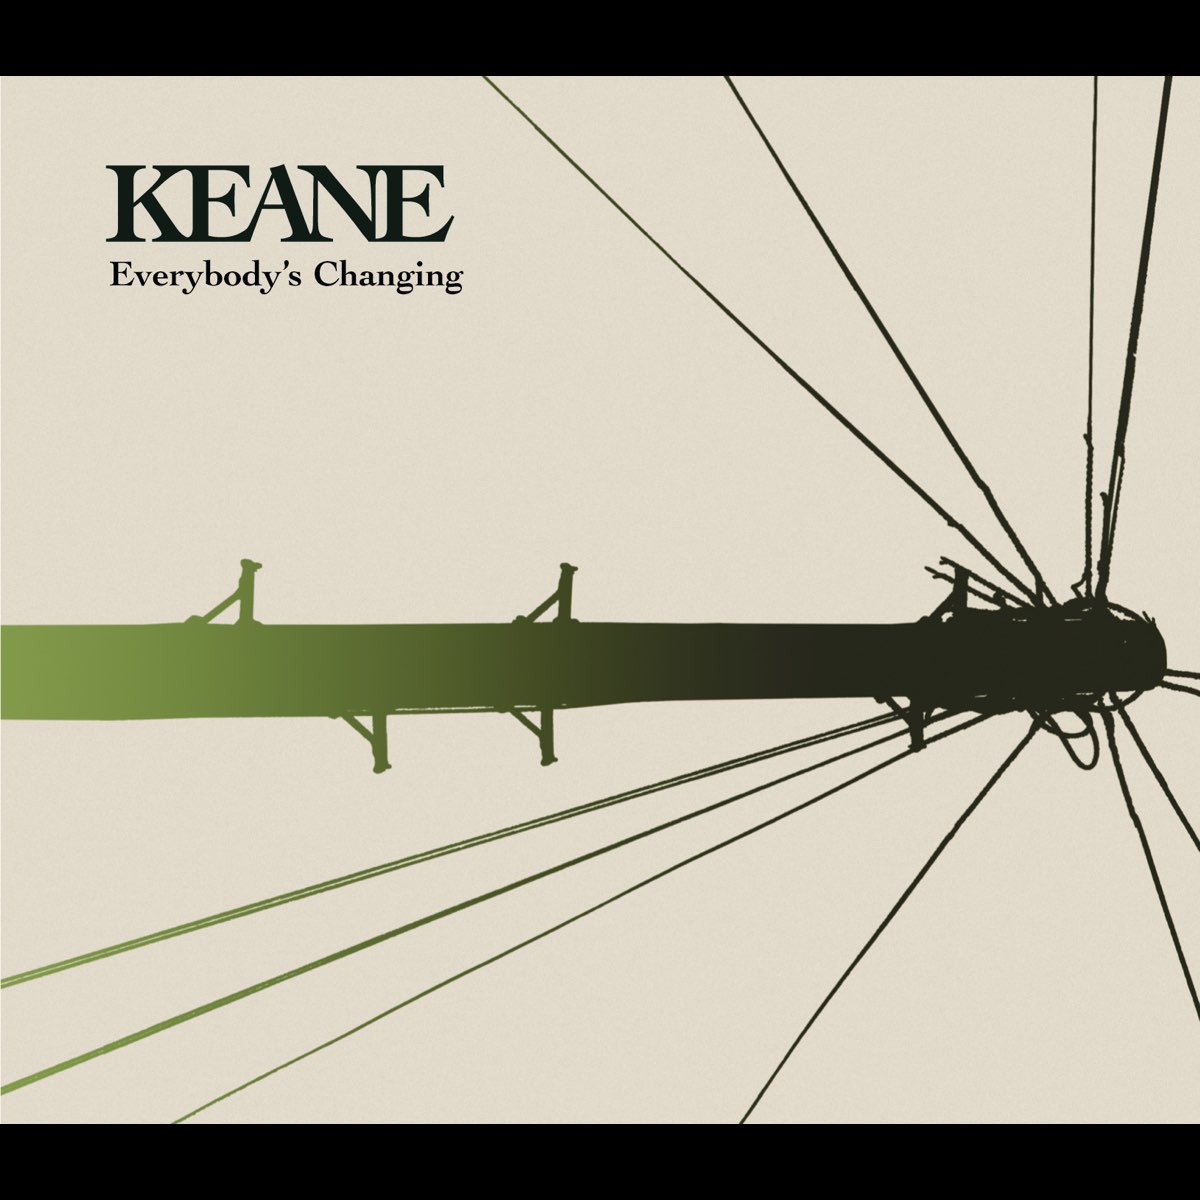 Everybody's Changing - Single by Keane on Apple Music